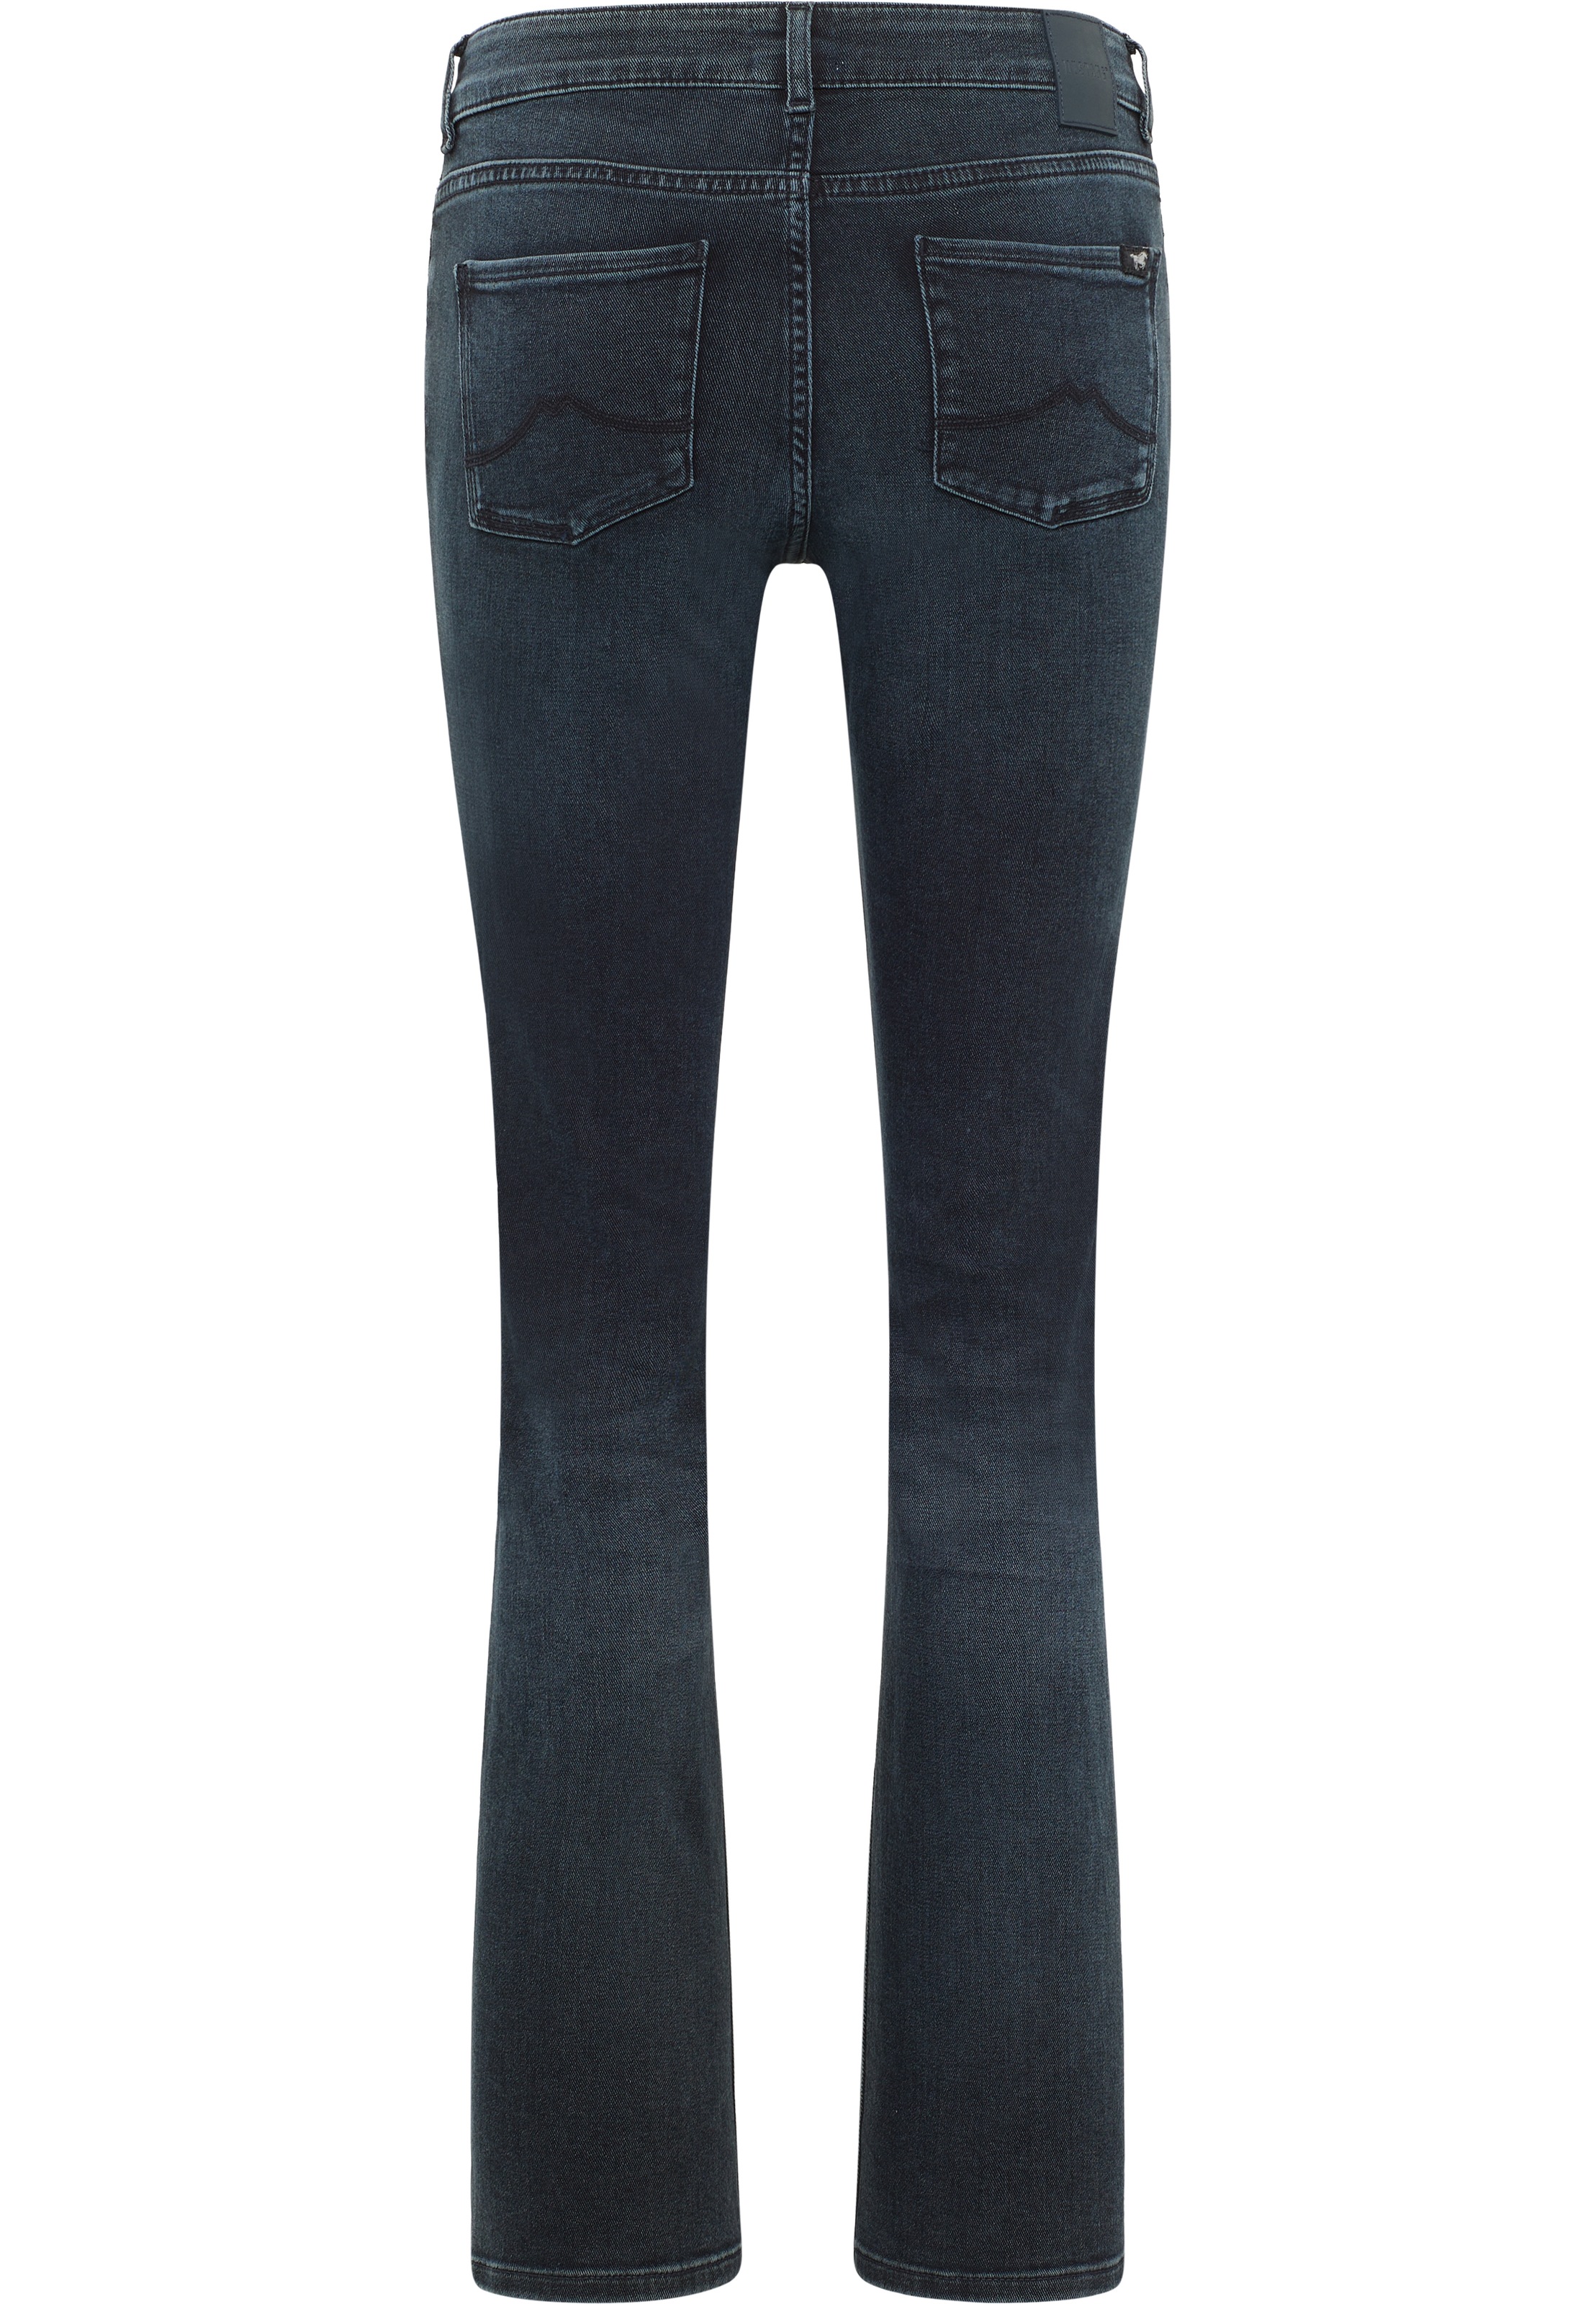 MUSTANG Straight-Jeans »Style Crosby Relaxed Straight« kaufen im OTTO  Online Shop